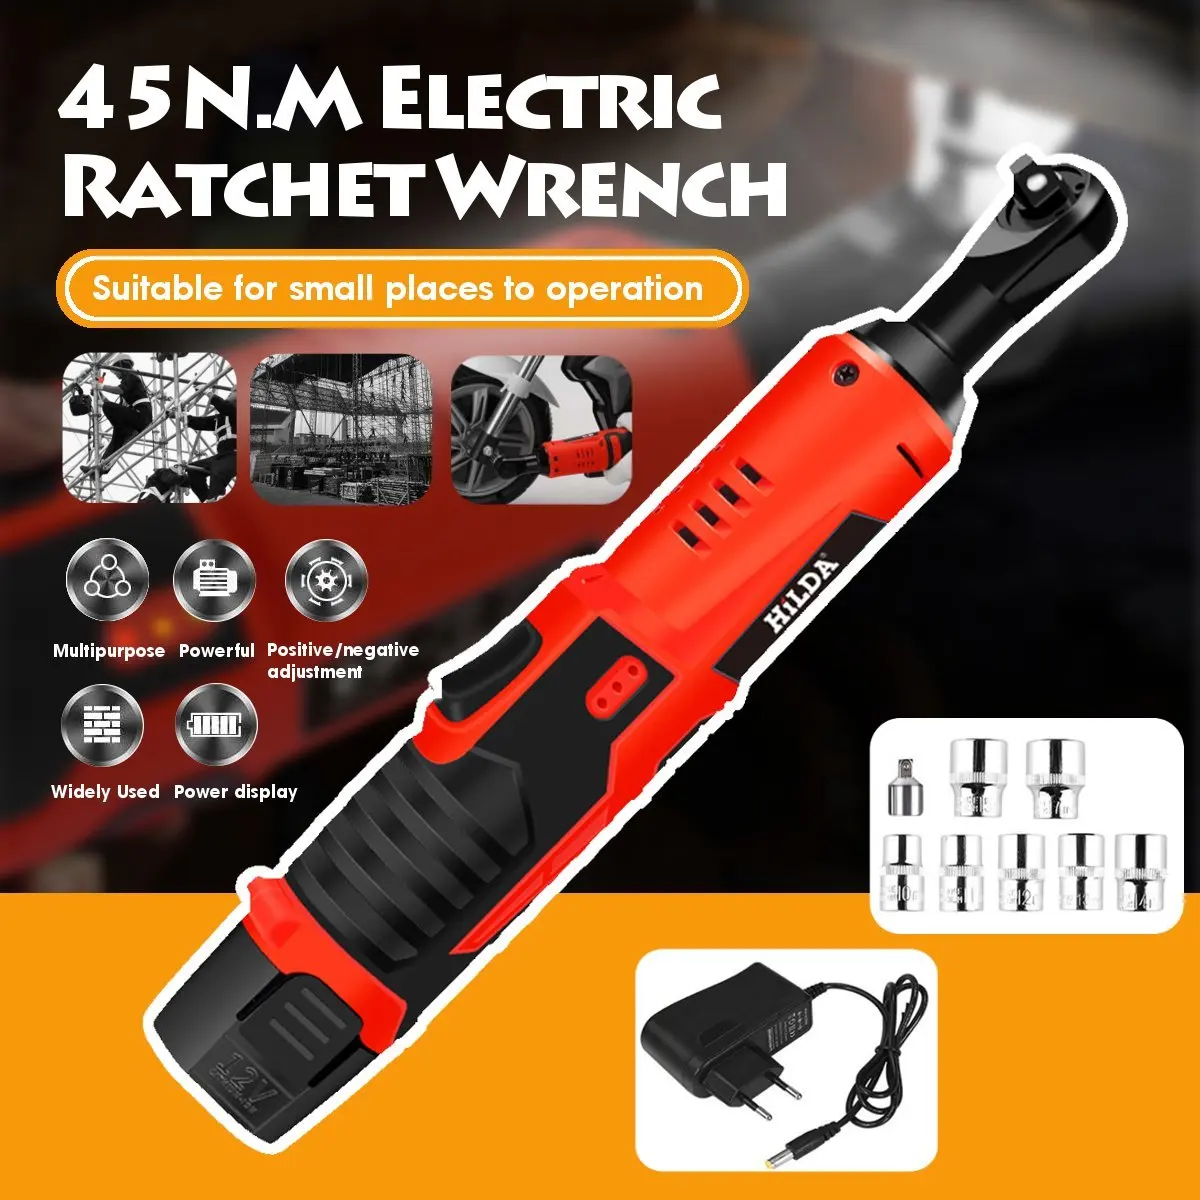 

DC 12V Electric Wrench Kit Cordless Ratchet Wrench Rechargeable Scaffolding Torque Ratchet with Sockets Tools Power Tools